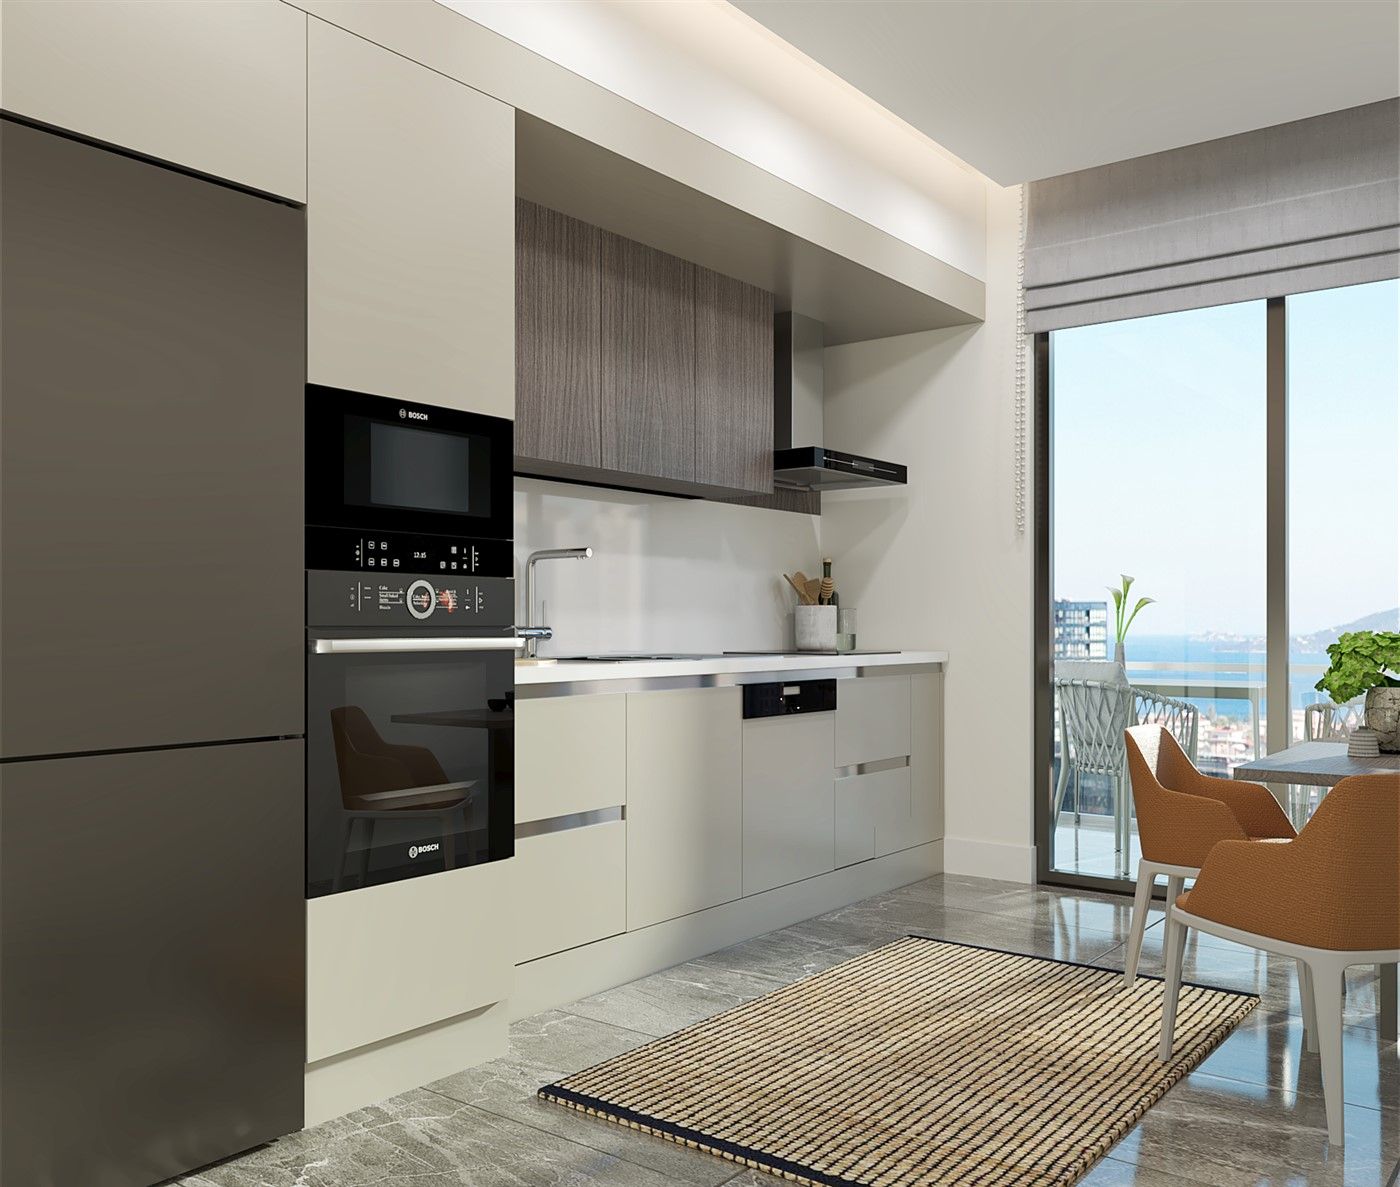 Apartments in Inew complex with prime location in Maltepe district, İstanbul